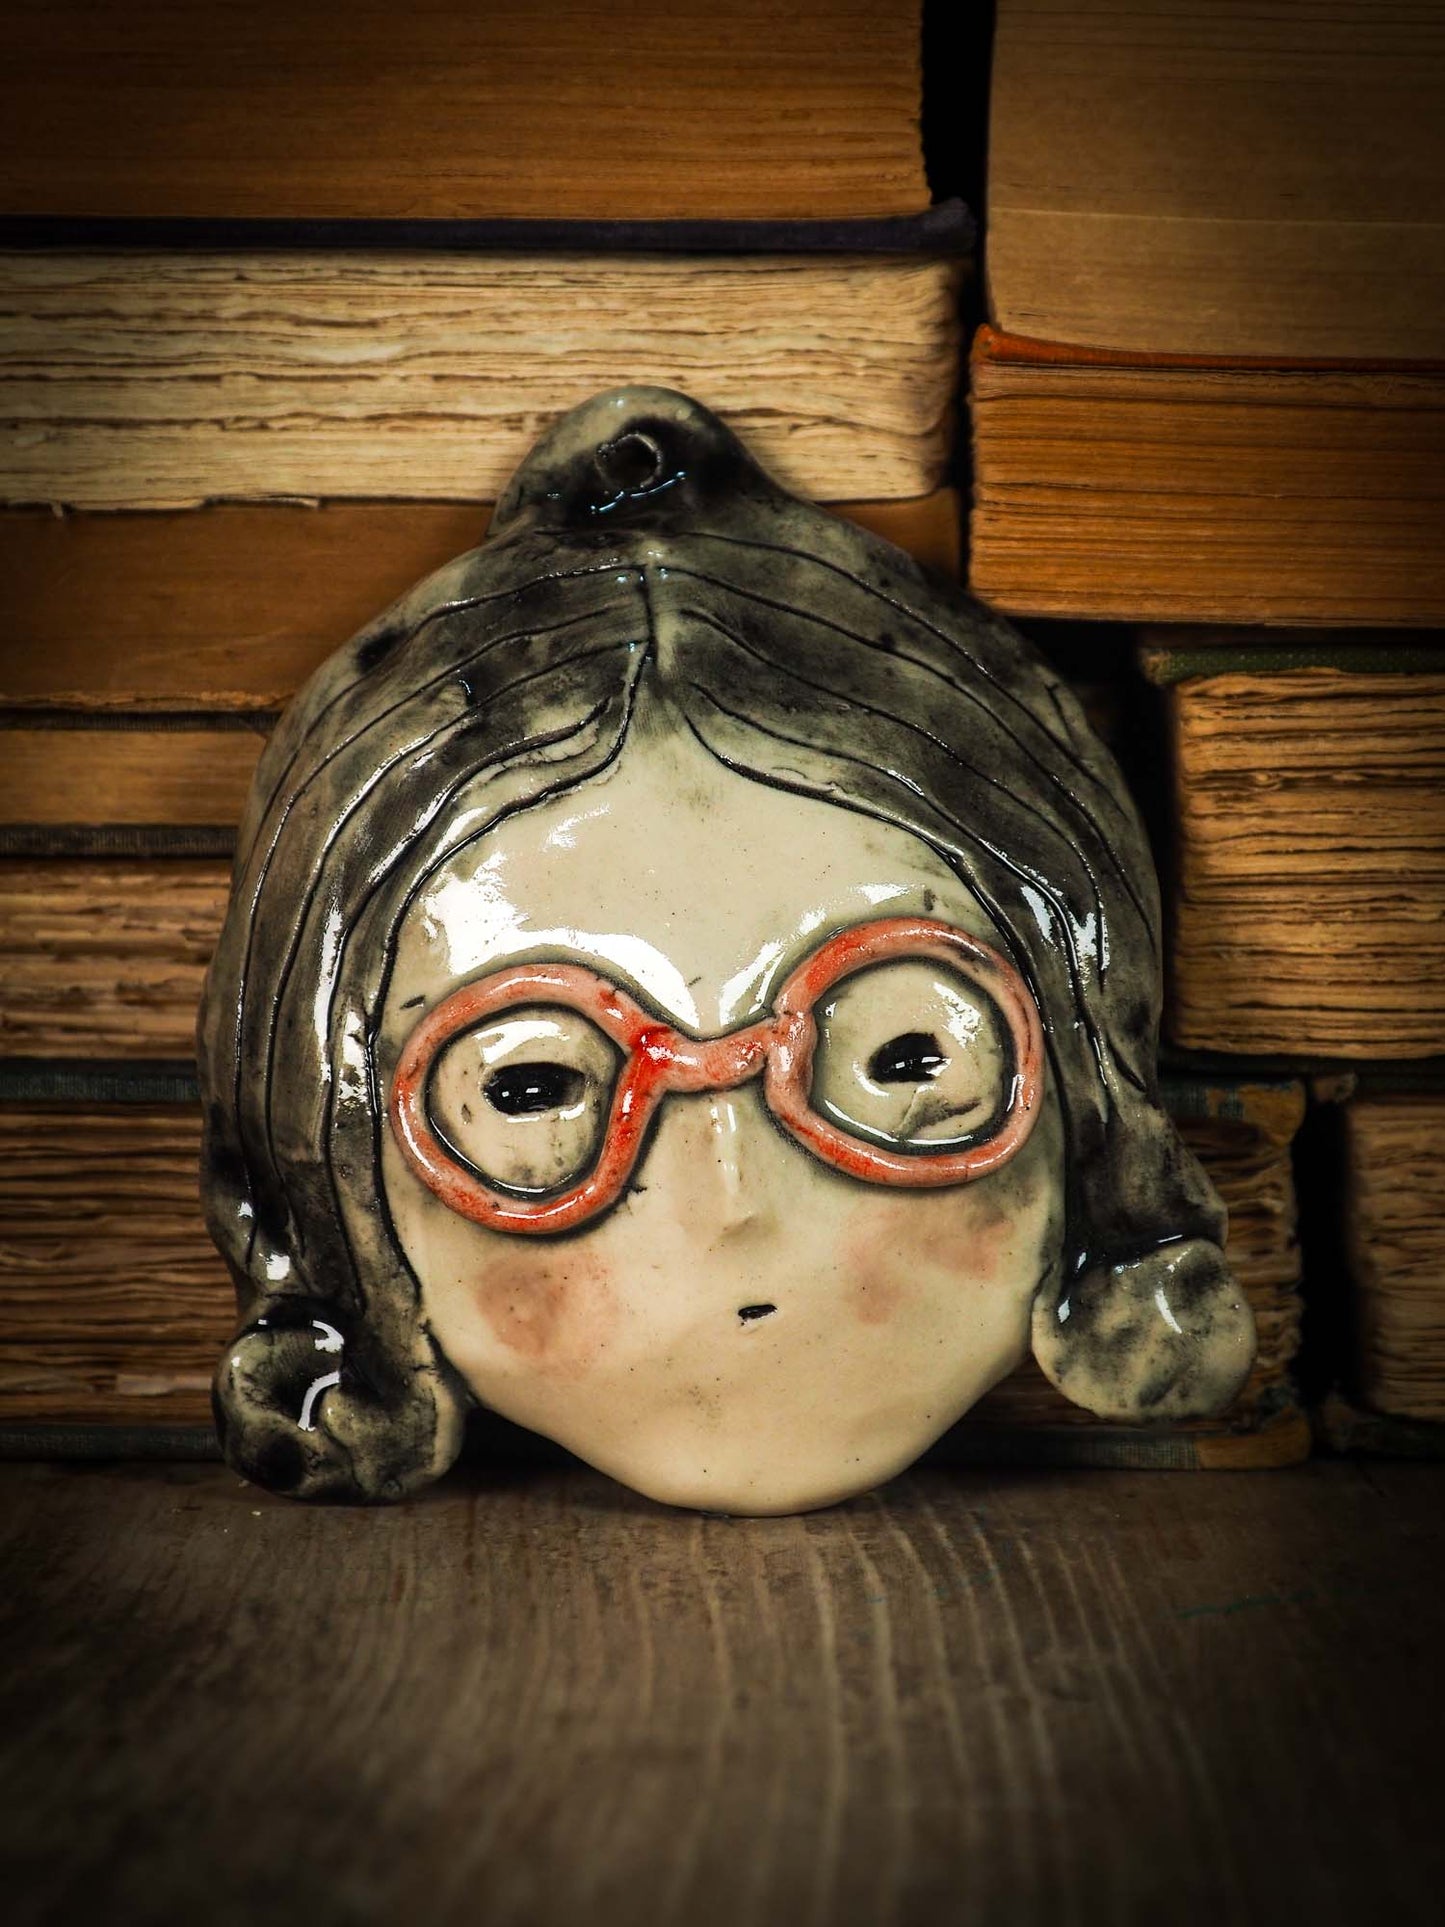 Original handmade ceramic decorative head bust figurine by Idania Salcido, Danita Art. A unique ceramic artwork designed, hand sculpted and fire glazed on my studio. Beautiful handmade touch for any home, this unique original figurine will highlight and match a personal home decoration style, vintage, eclectic, modern.